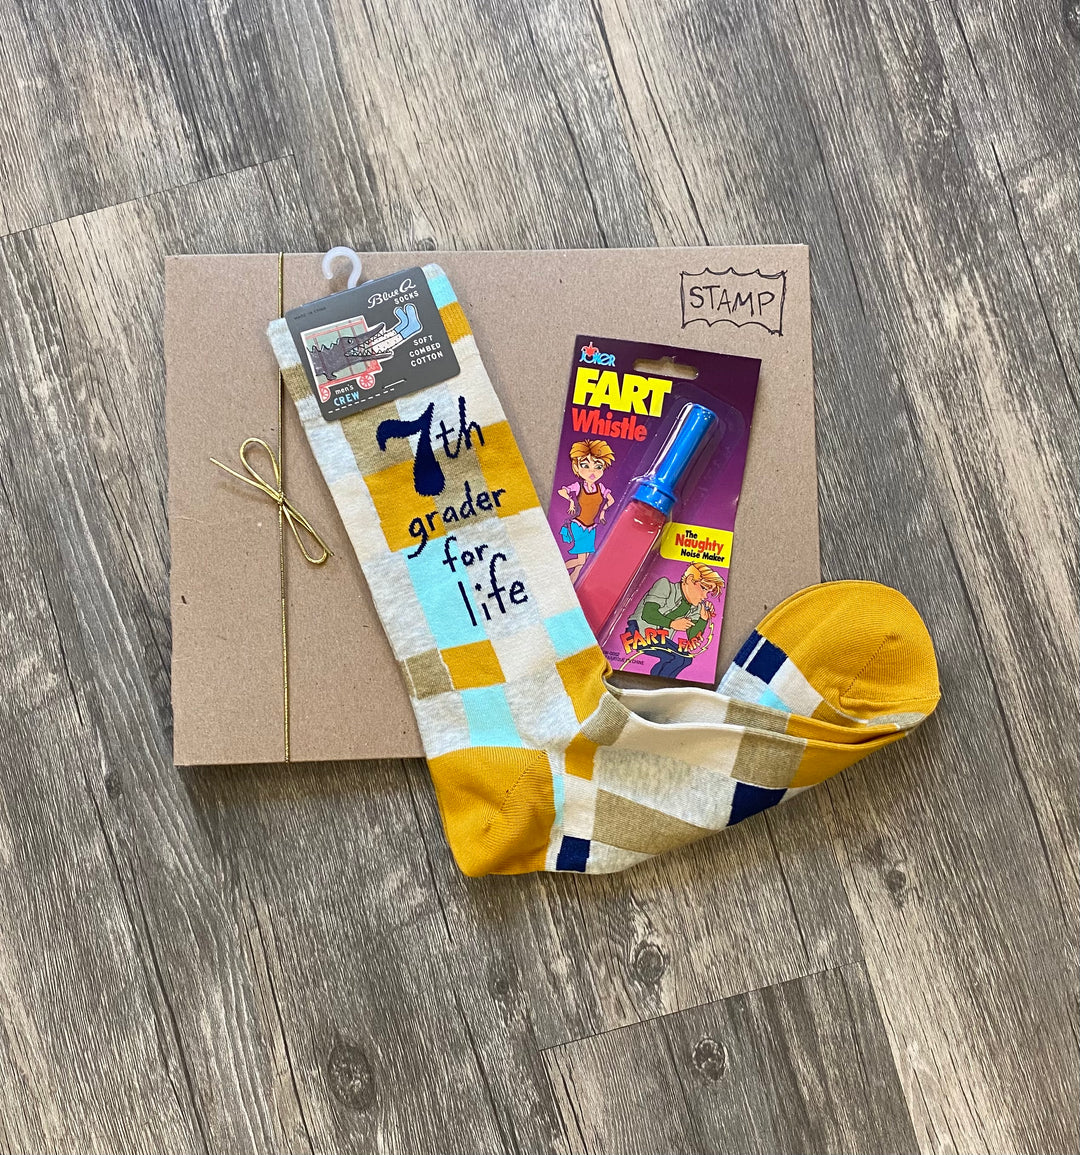 Sock Mail: Why These Fun Socks Make Better Gifts Than Just Another Greeting Card